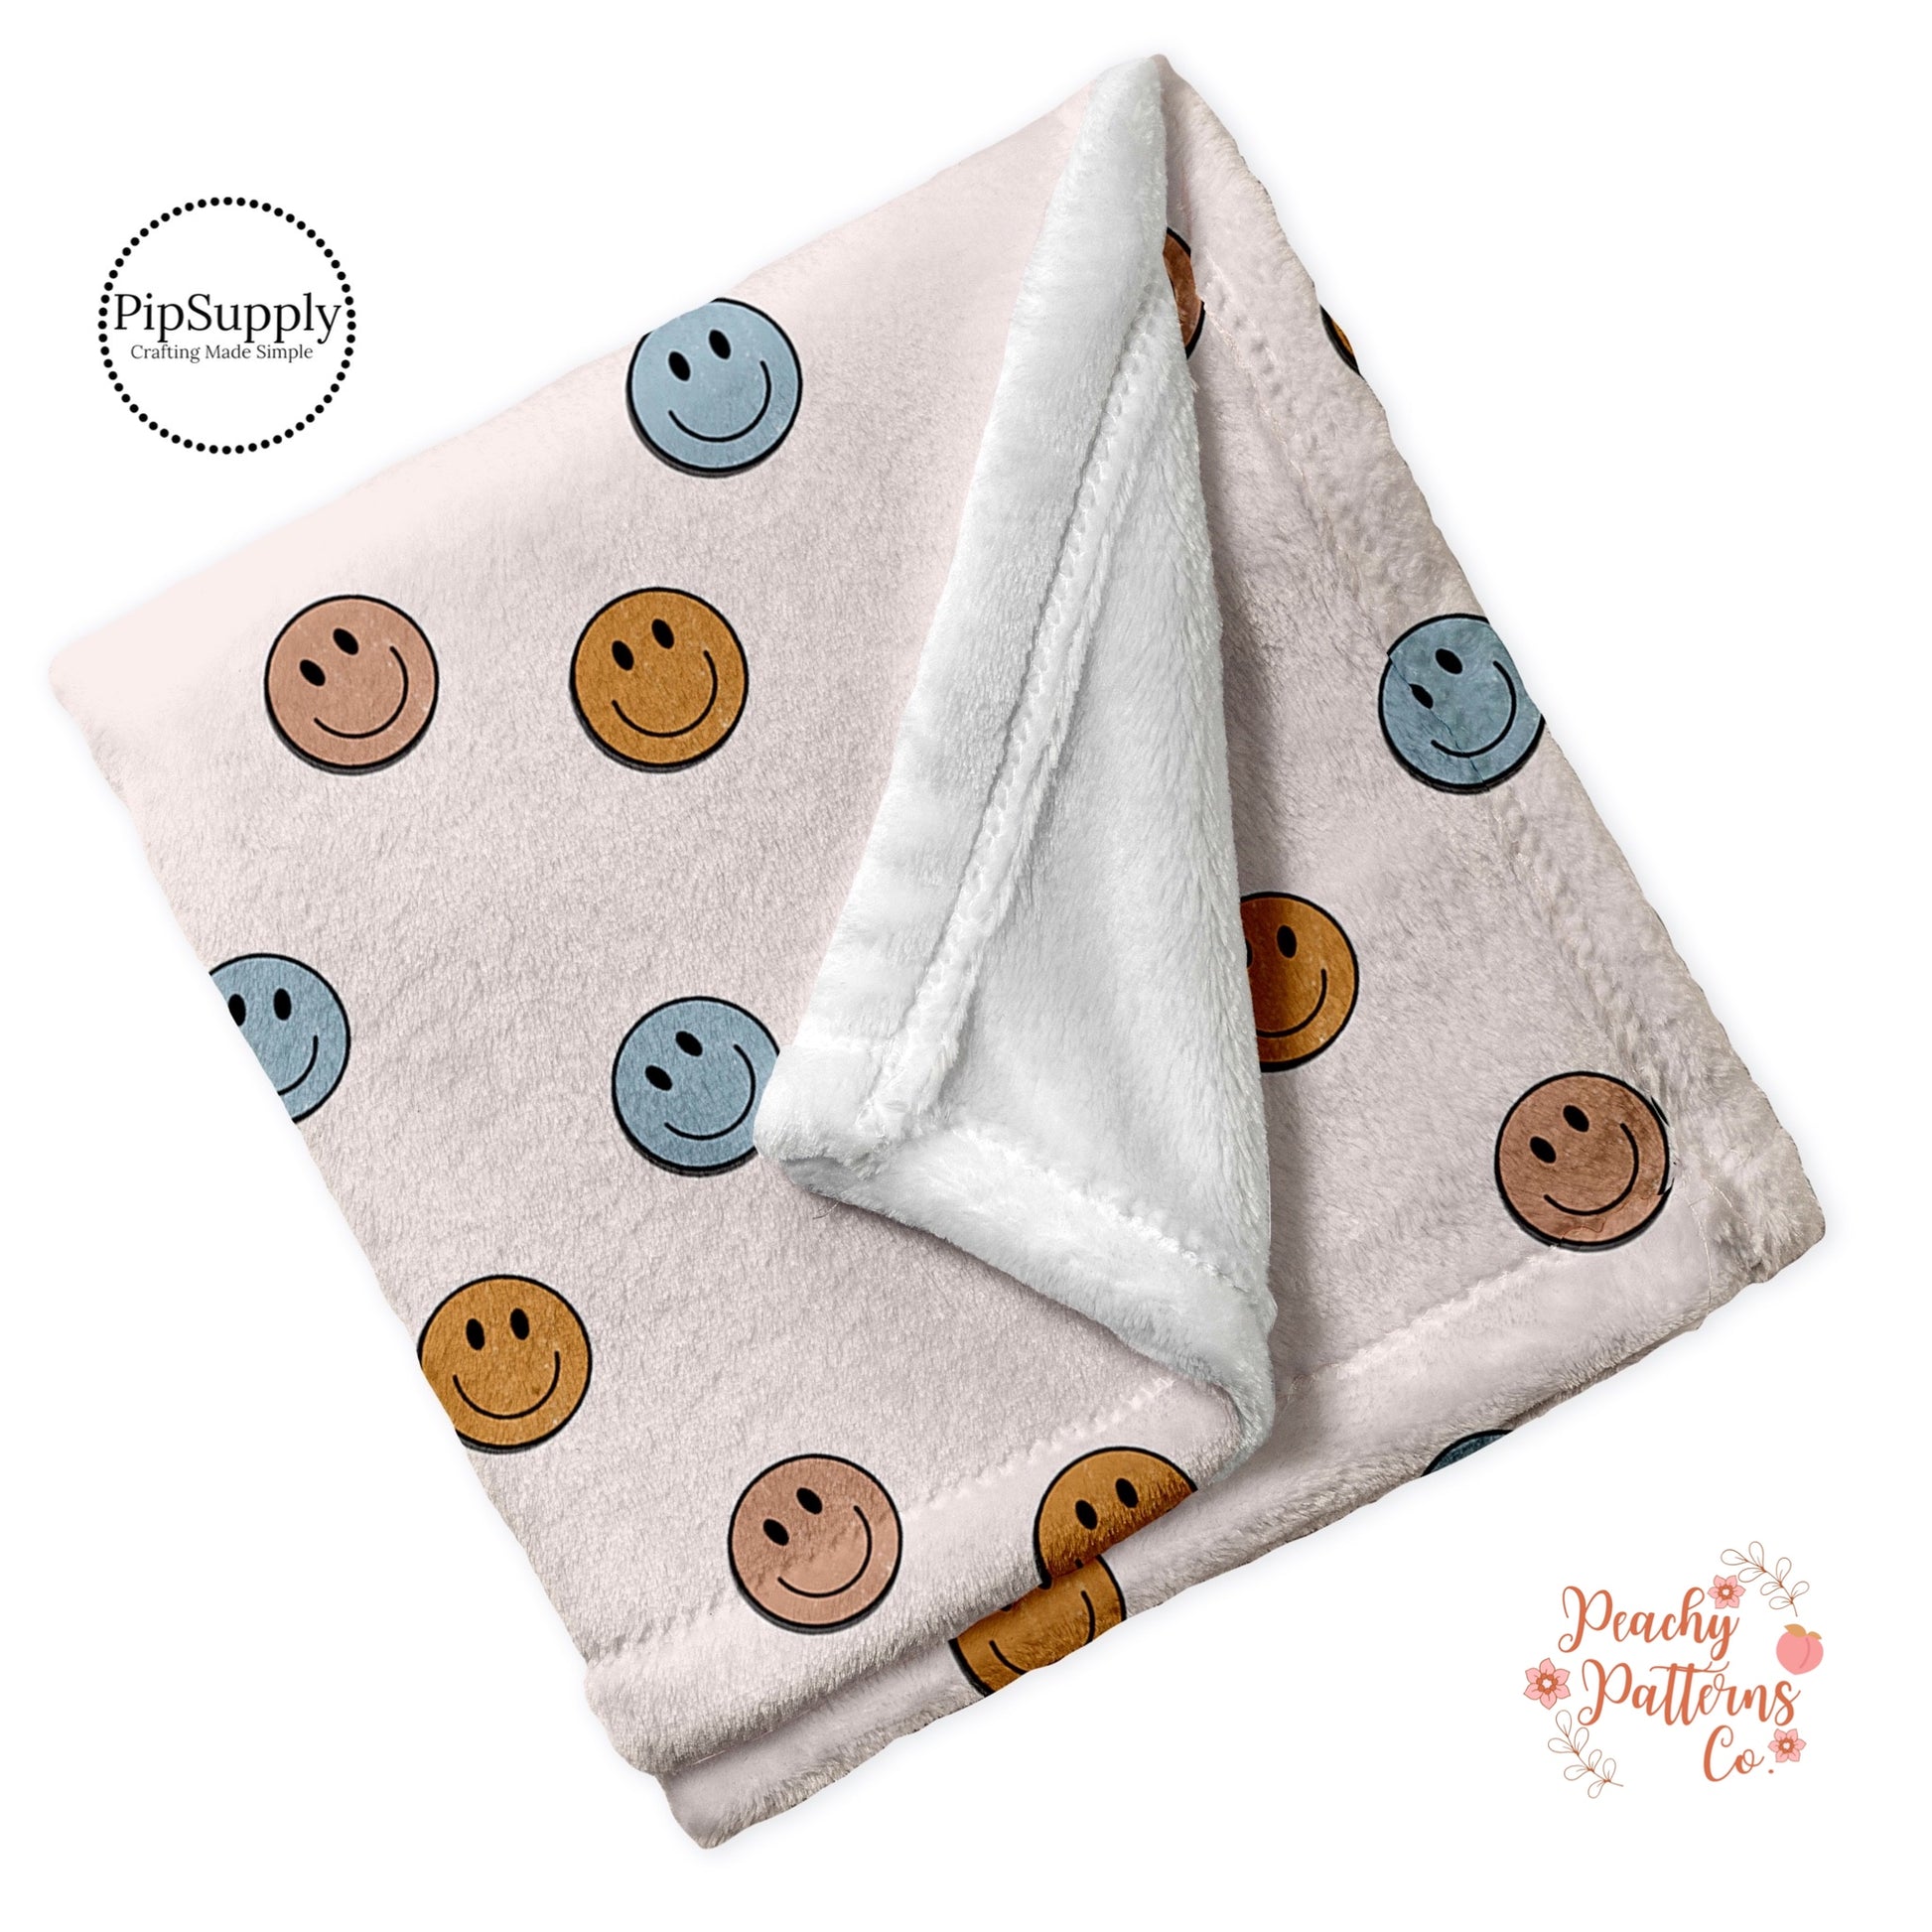 Smiley Faces Soft Minky Blanket - Custom Printed Neutral Happy Face Blanket 